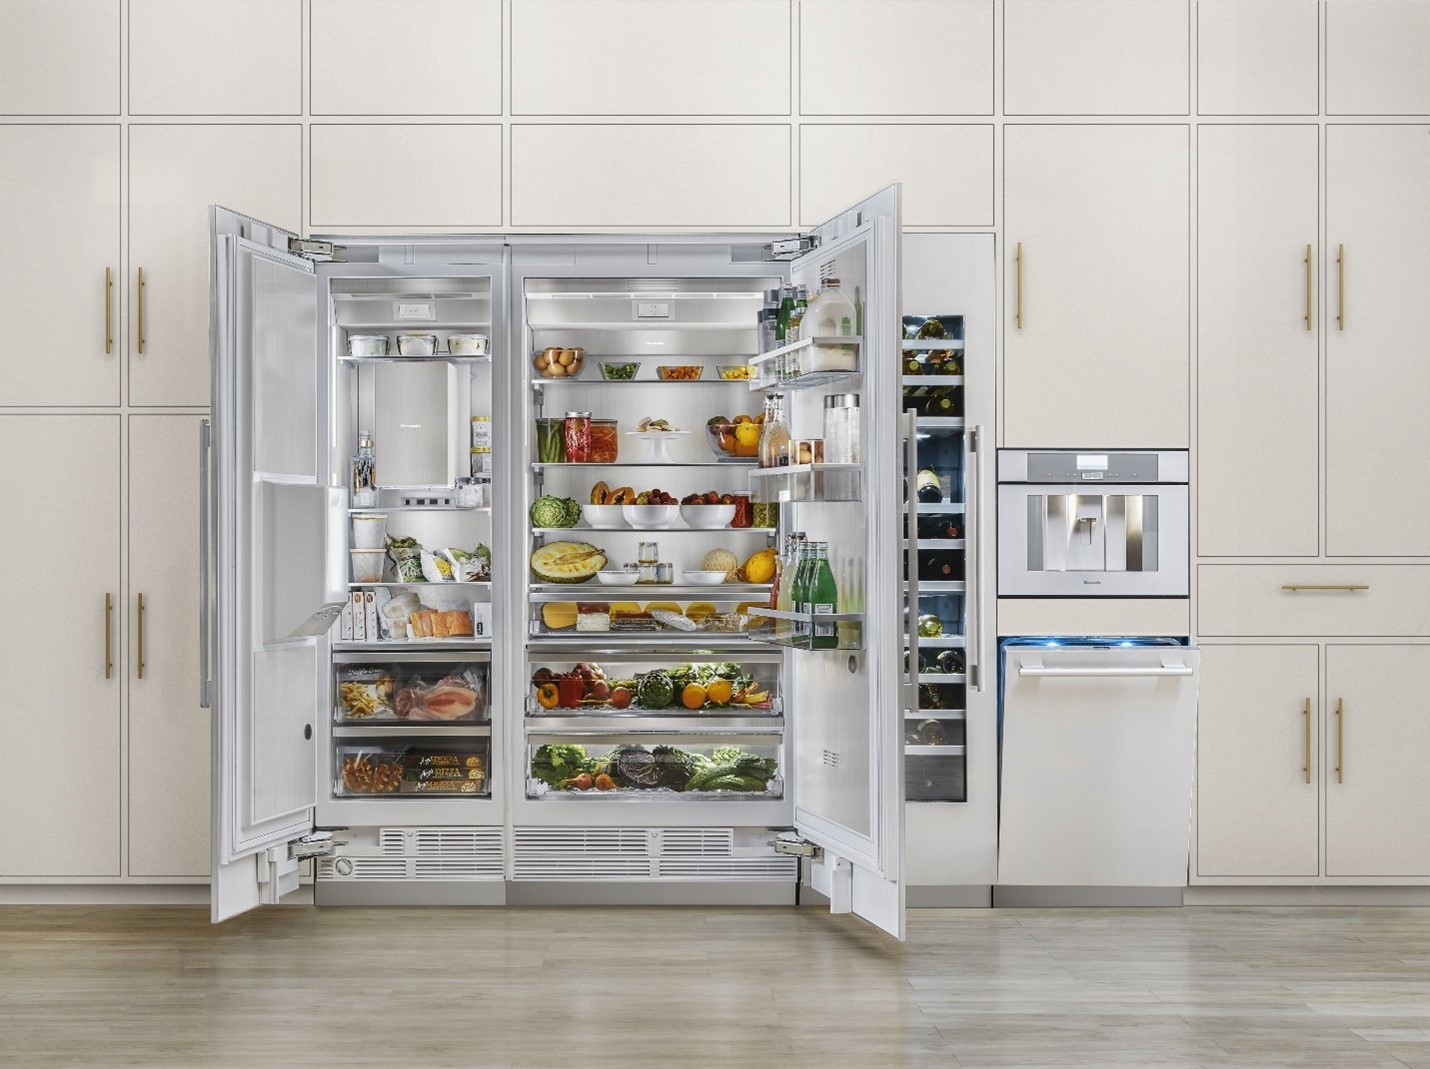 Bosch Home - A good fridge should contain plenty of food and the